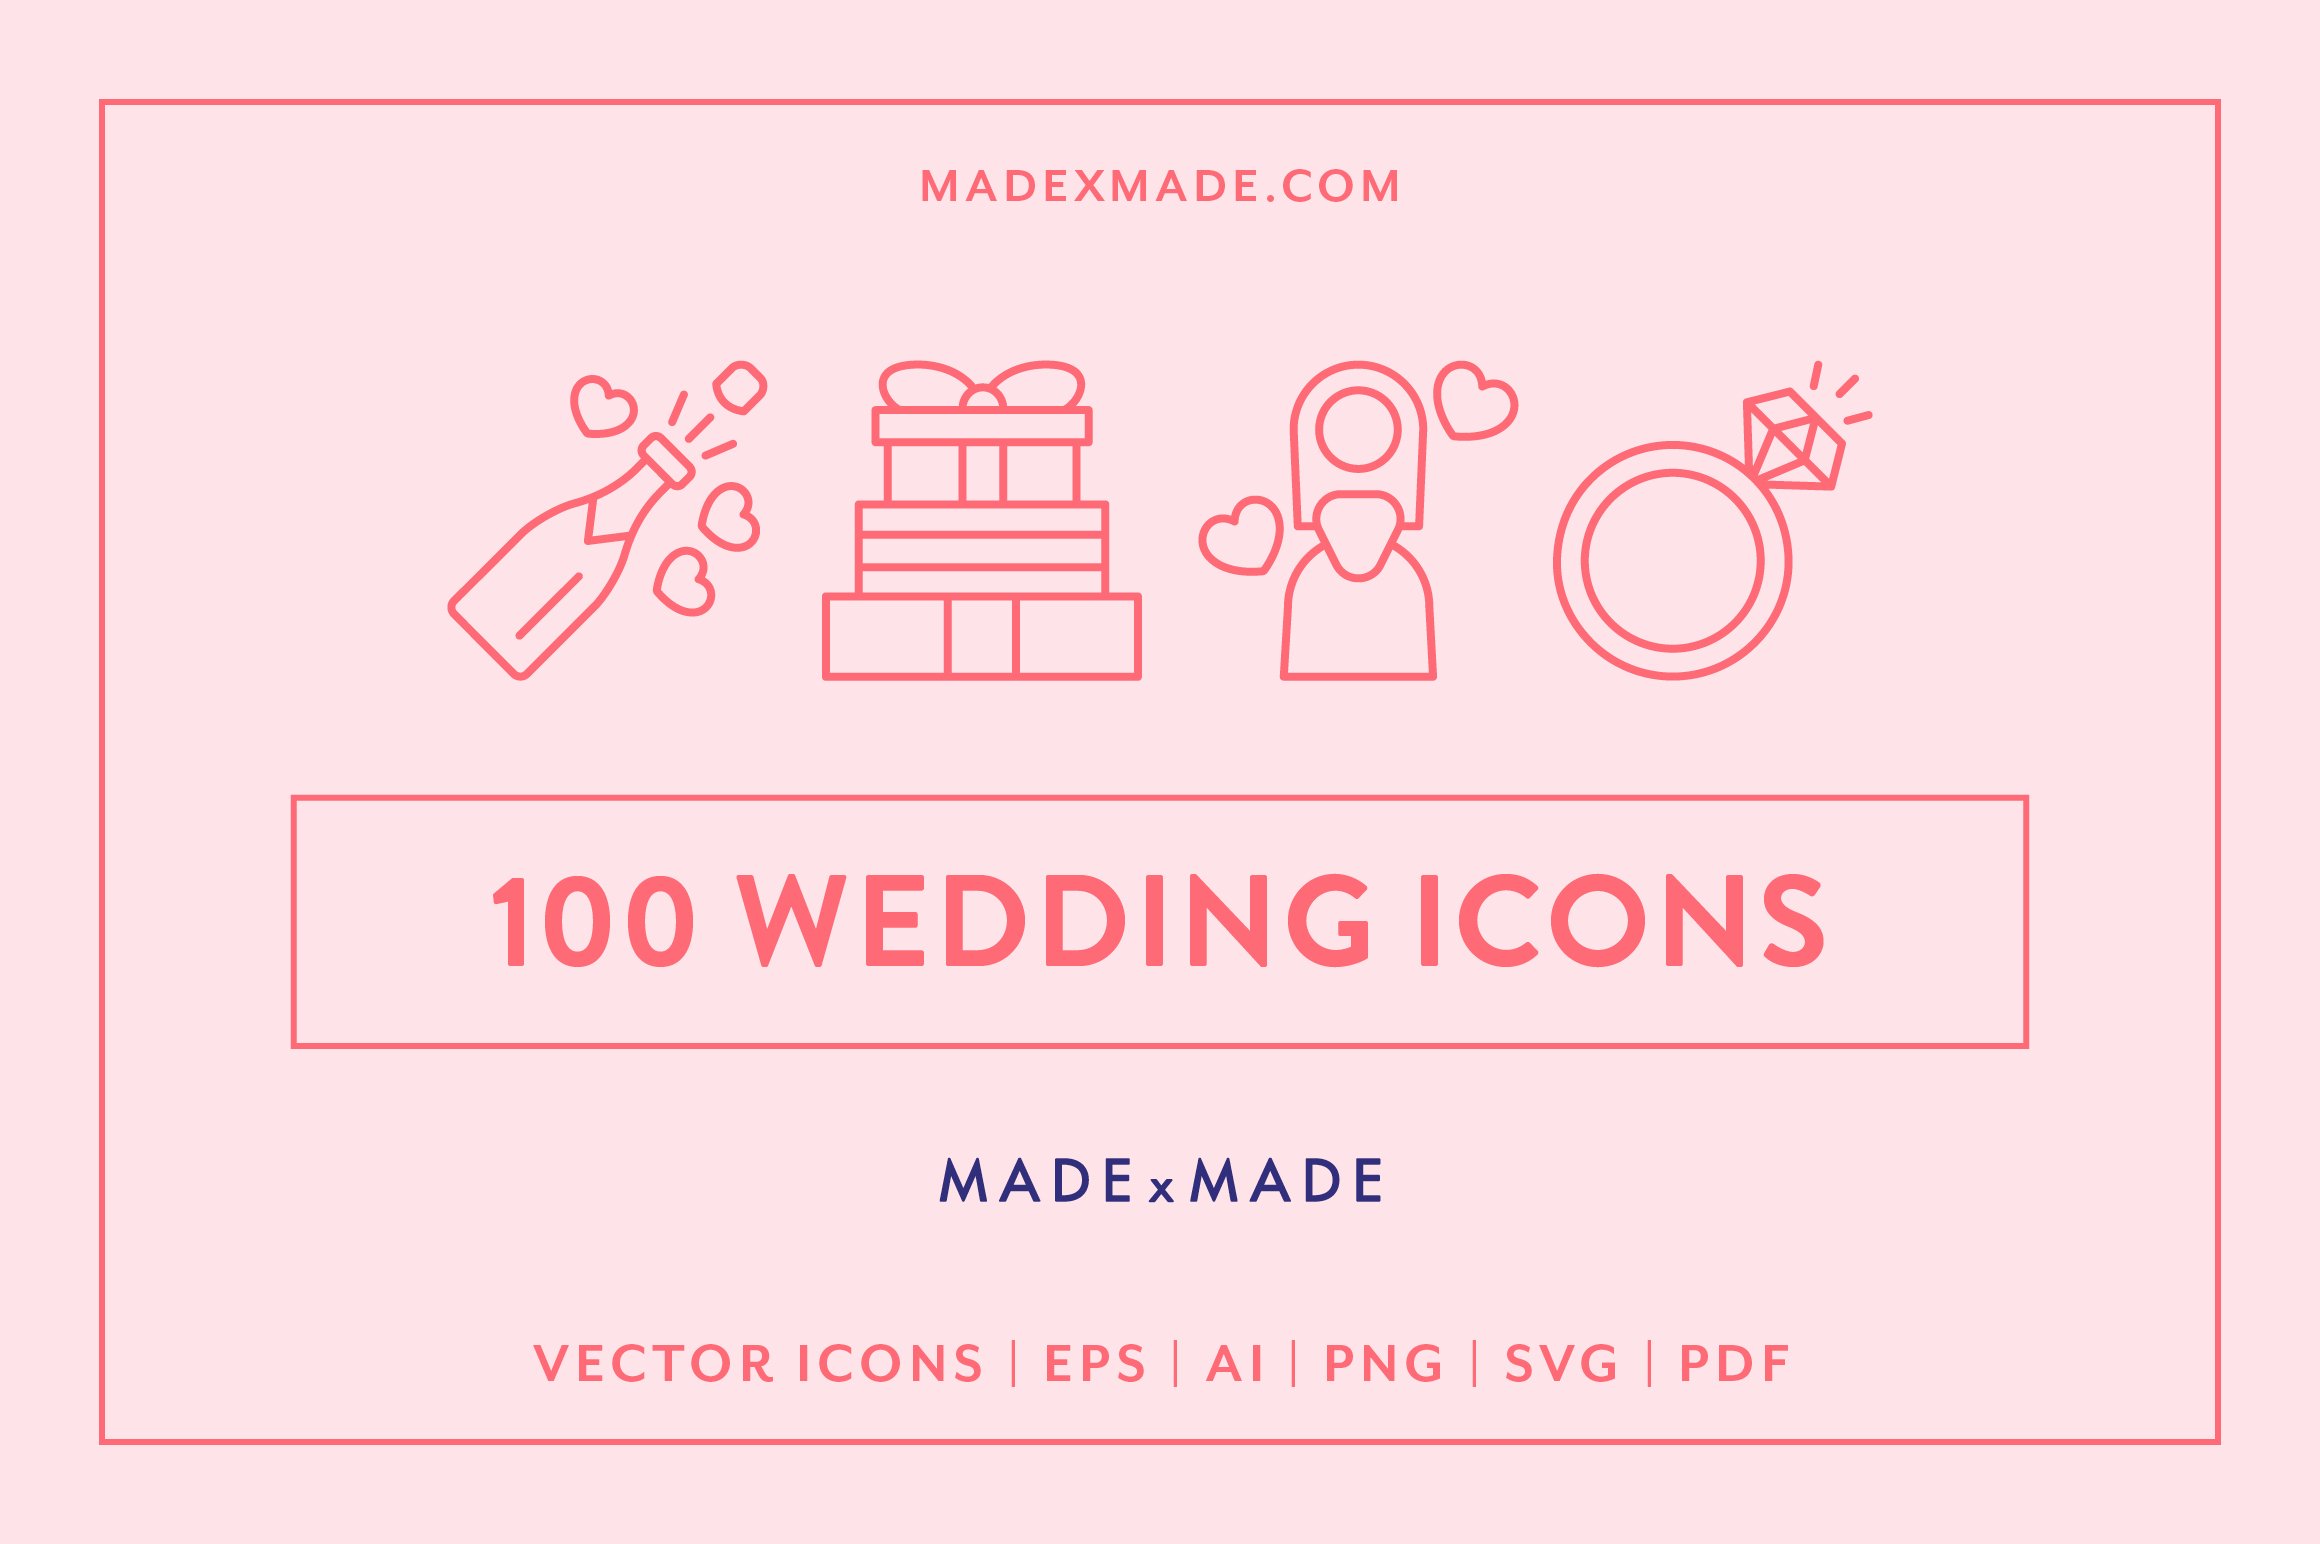 Wedding Line Icons cover image.